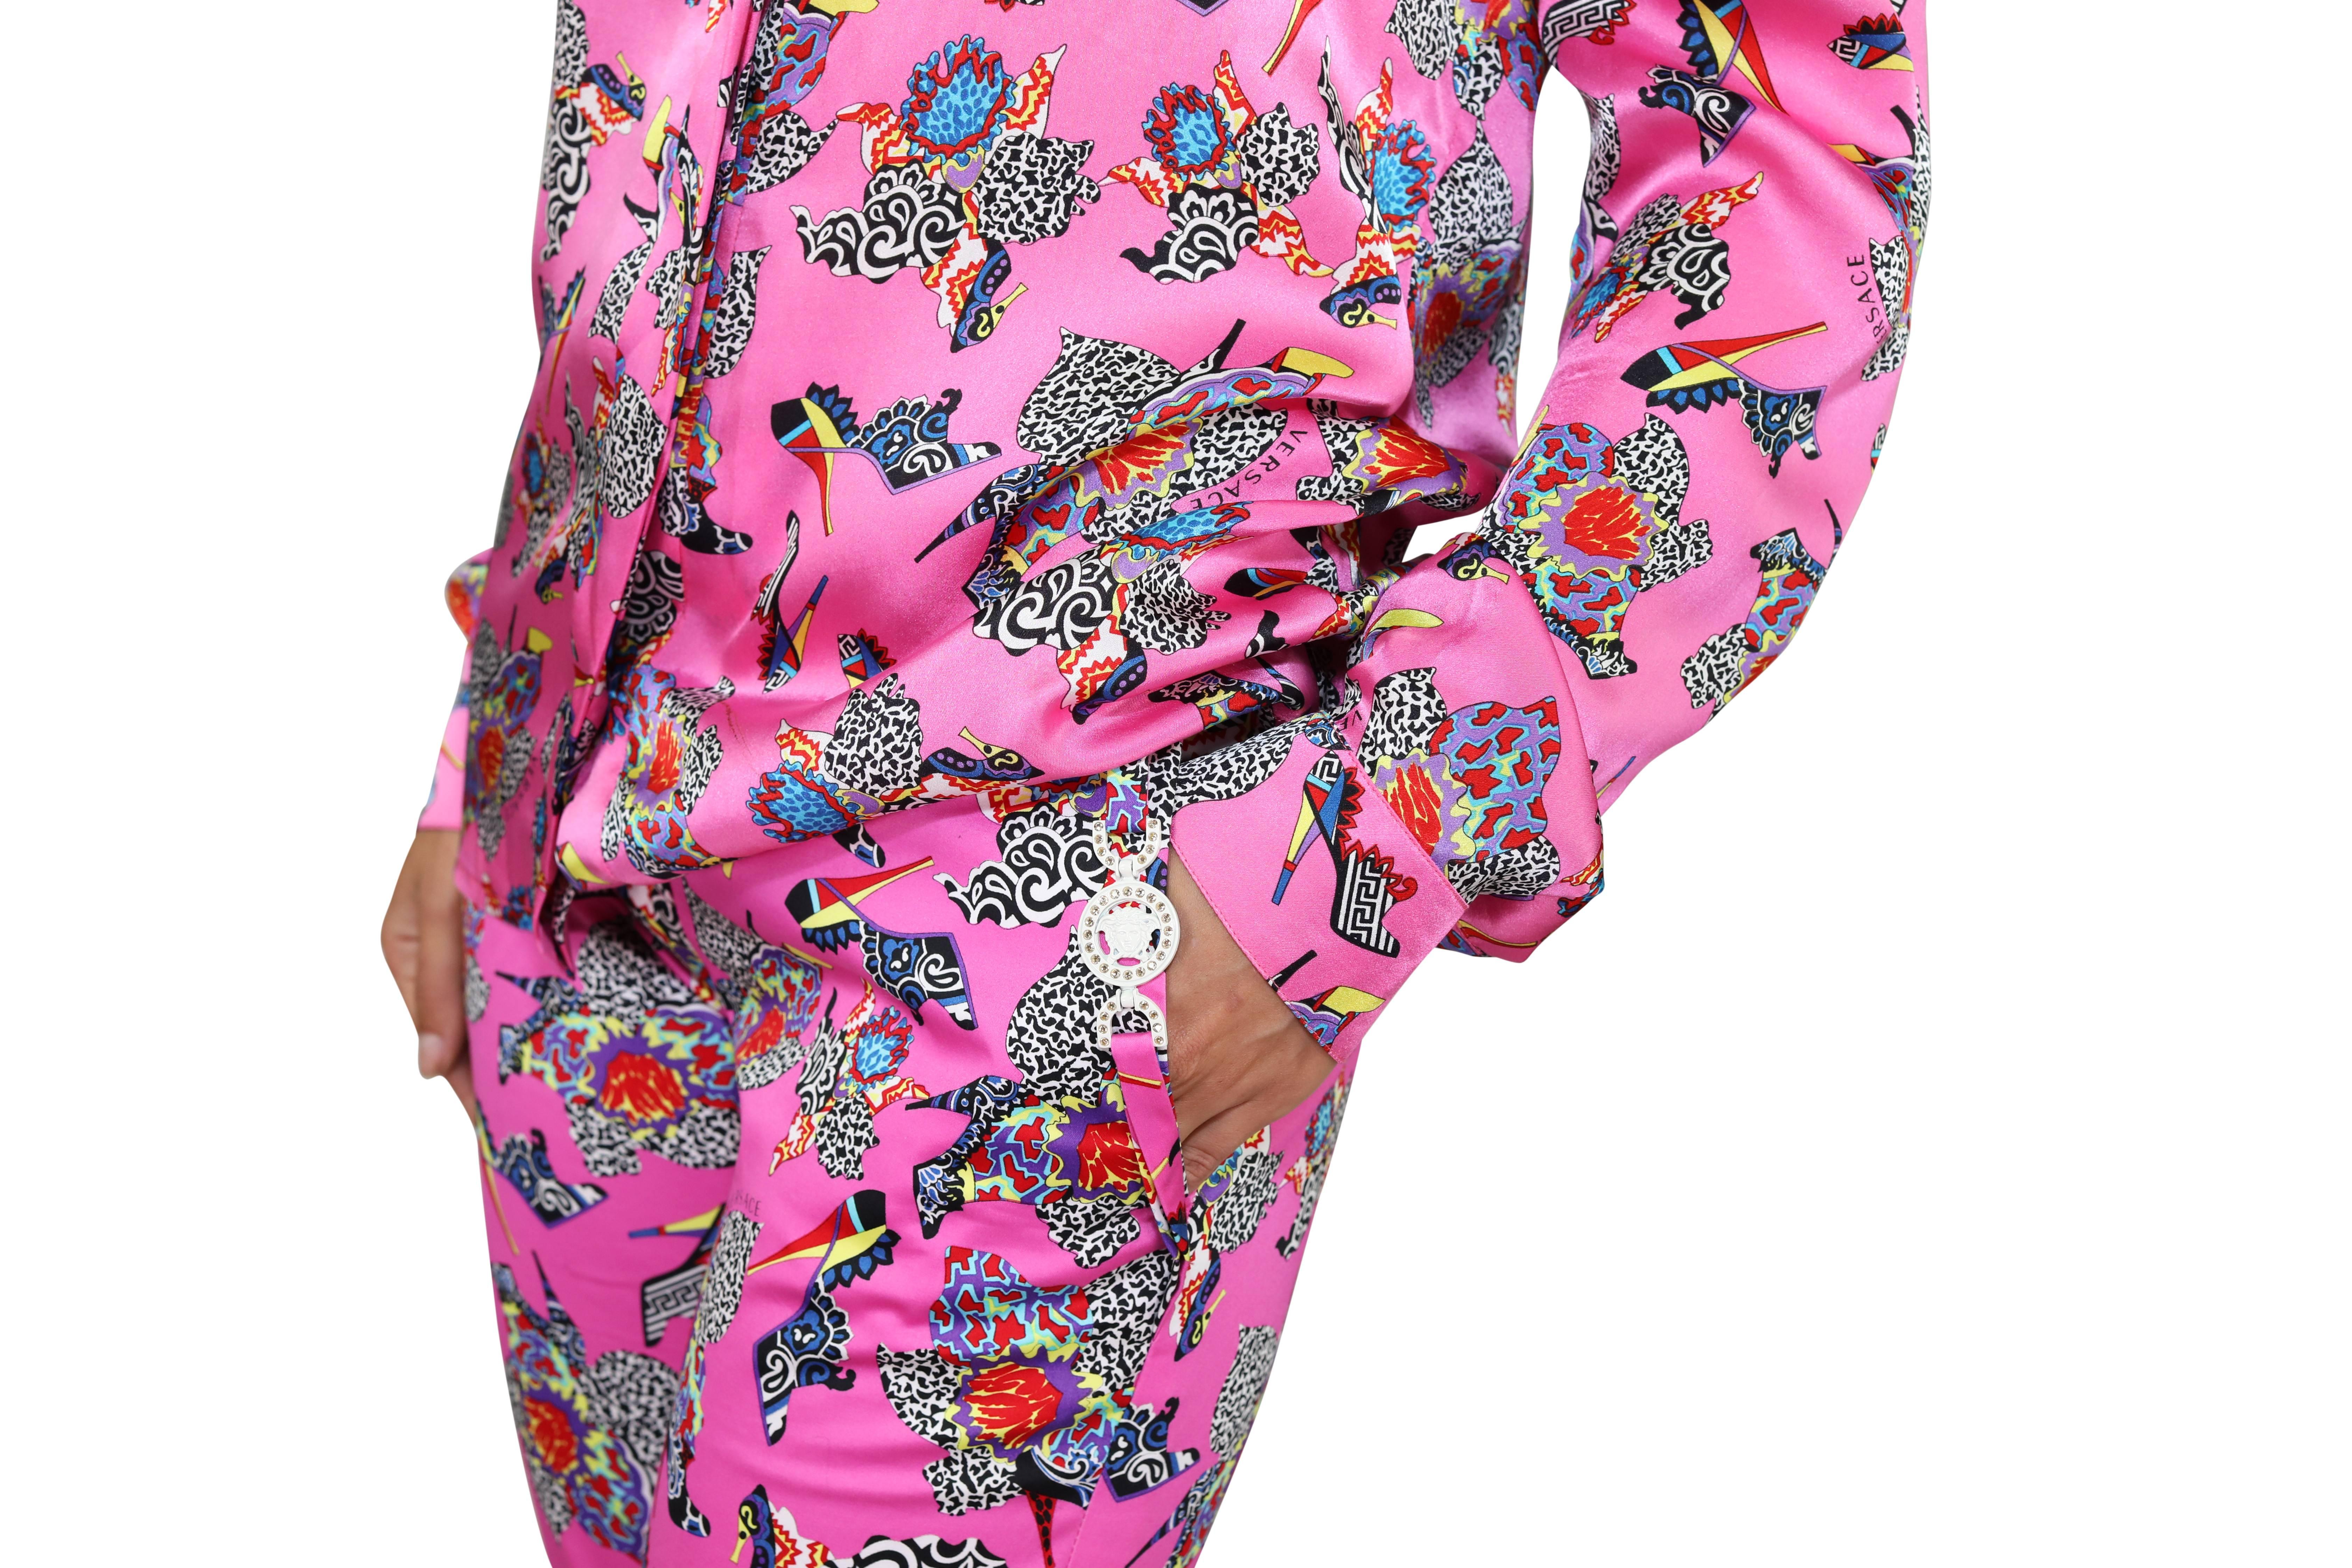 Pink Resort 2013 Look # 8 NEW VERSACE ICONIC PRINT SILK and COTTON PANT SUIT 38 - 2 For Sale